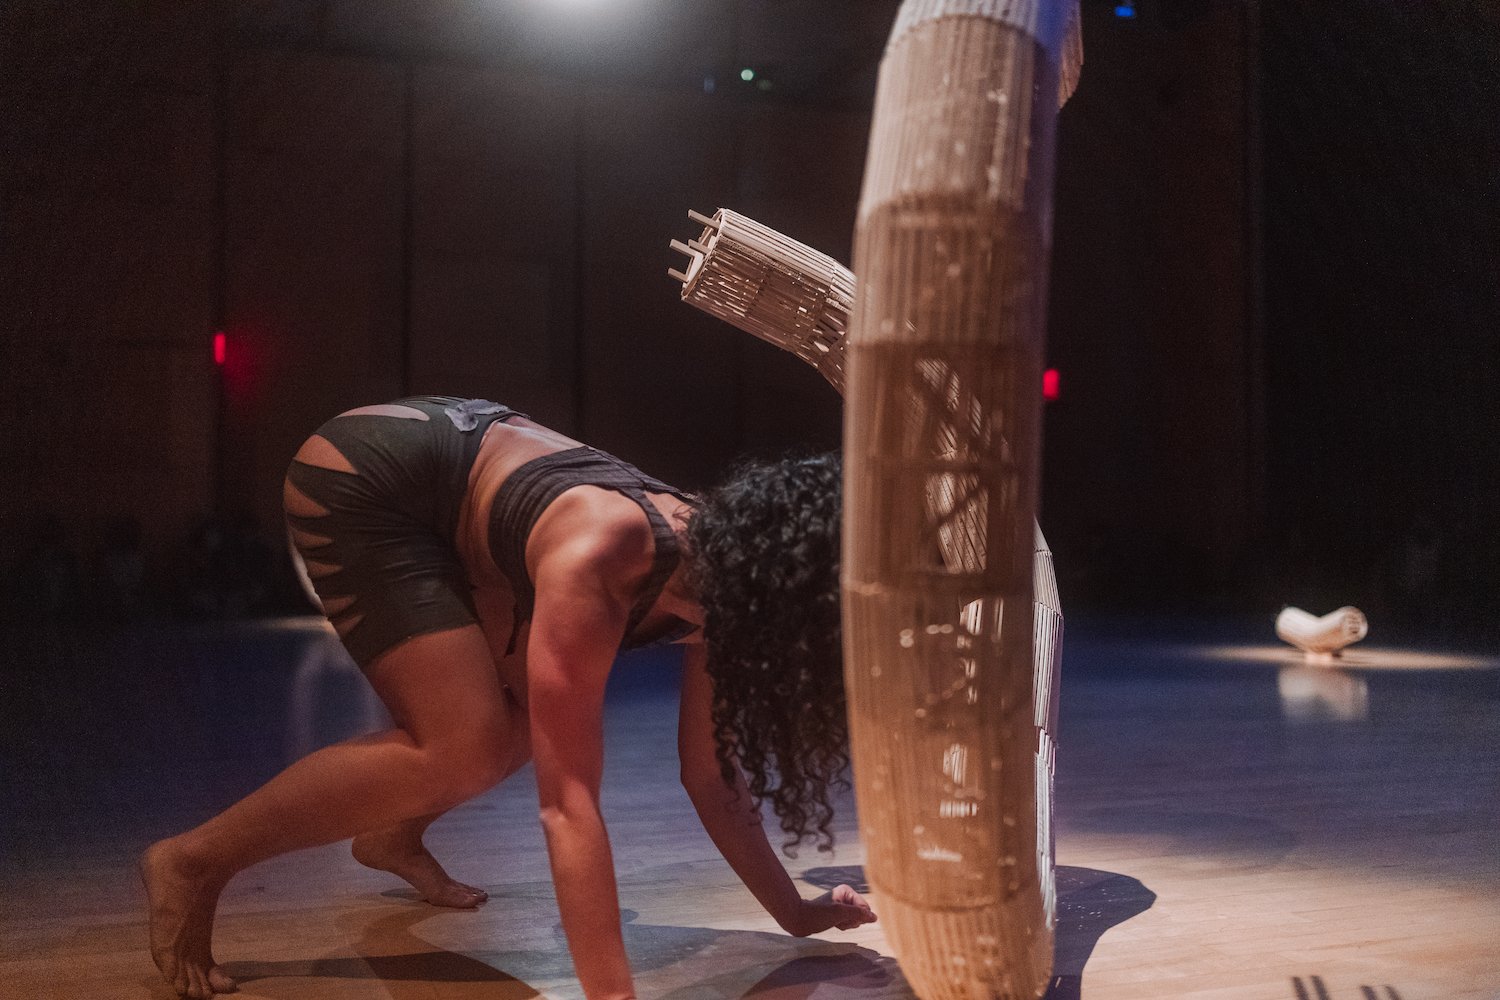   La Pelvis Project   (April 2022) / Creation and Performance: Priscilla Marrero with collaborating artistas for her MFA in Experimental Choreography from the University of California, Riverside Dance Department / Photos by: Ryan Poon and Kali Veach 